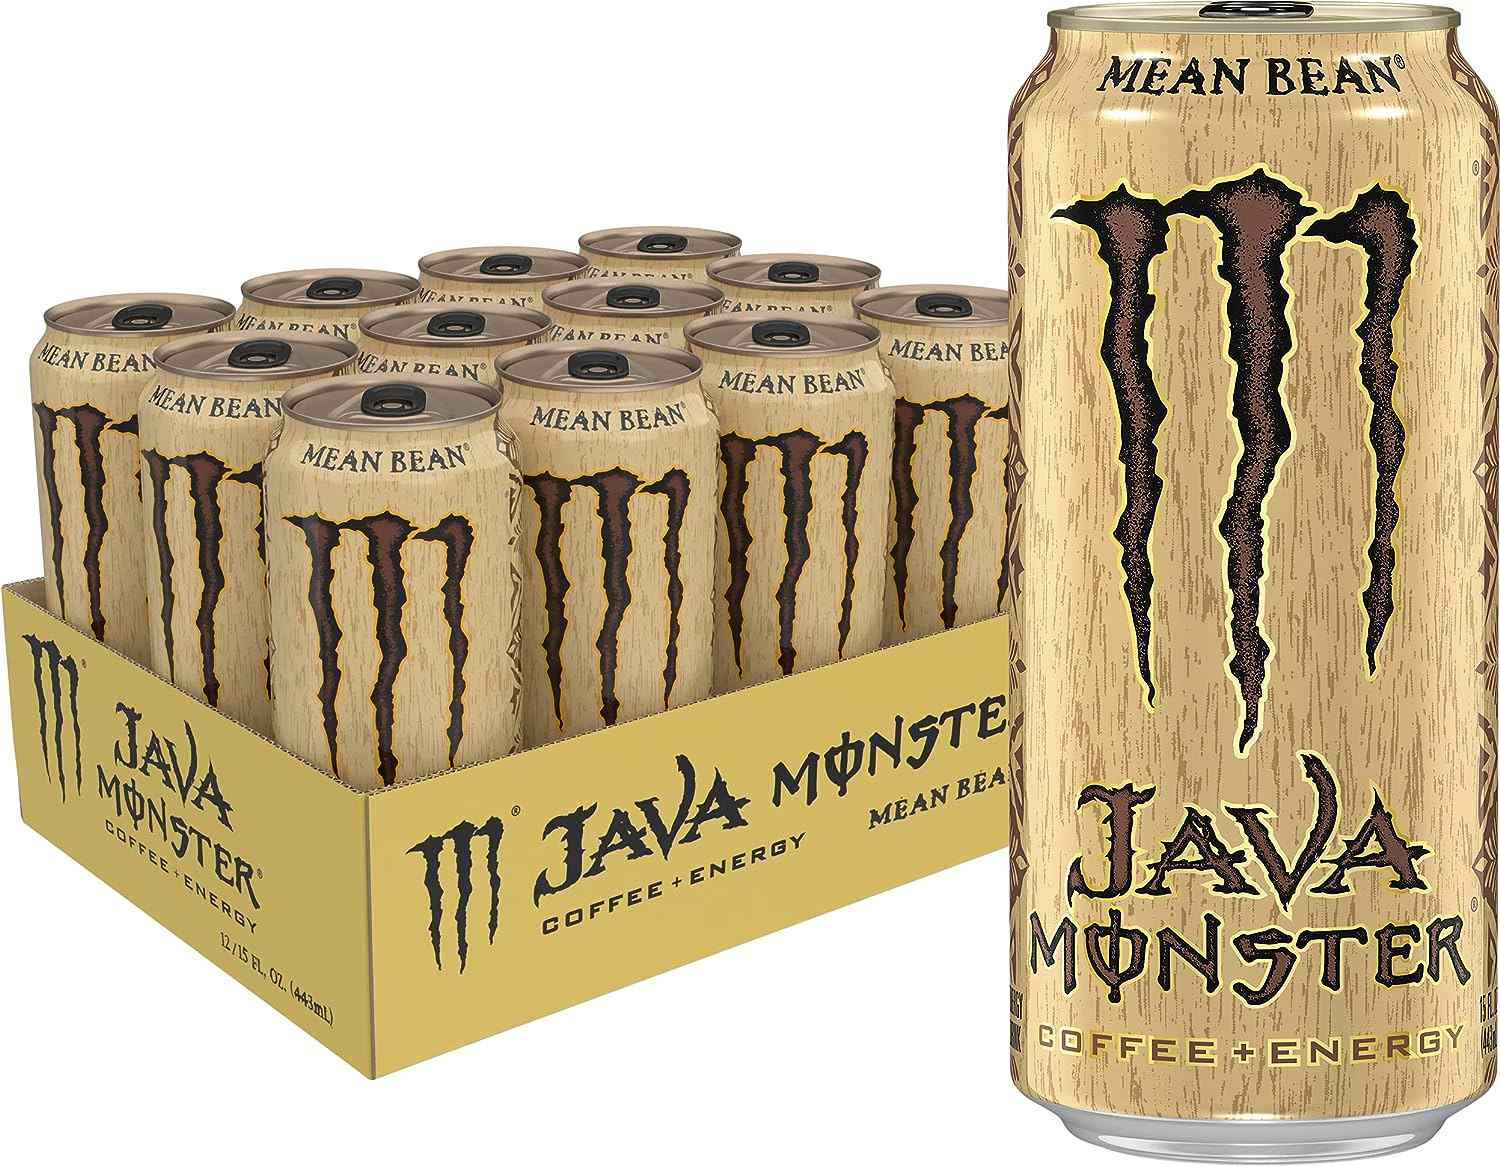 15-java-monster-nutrition-facts